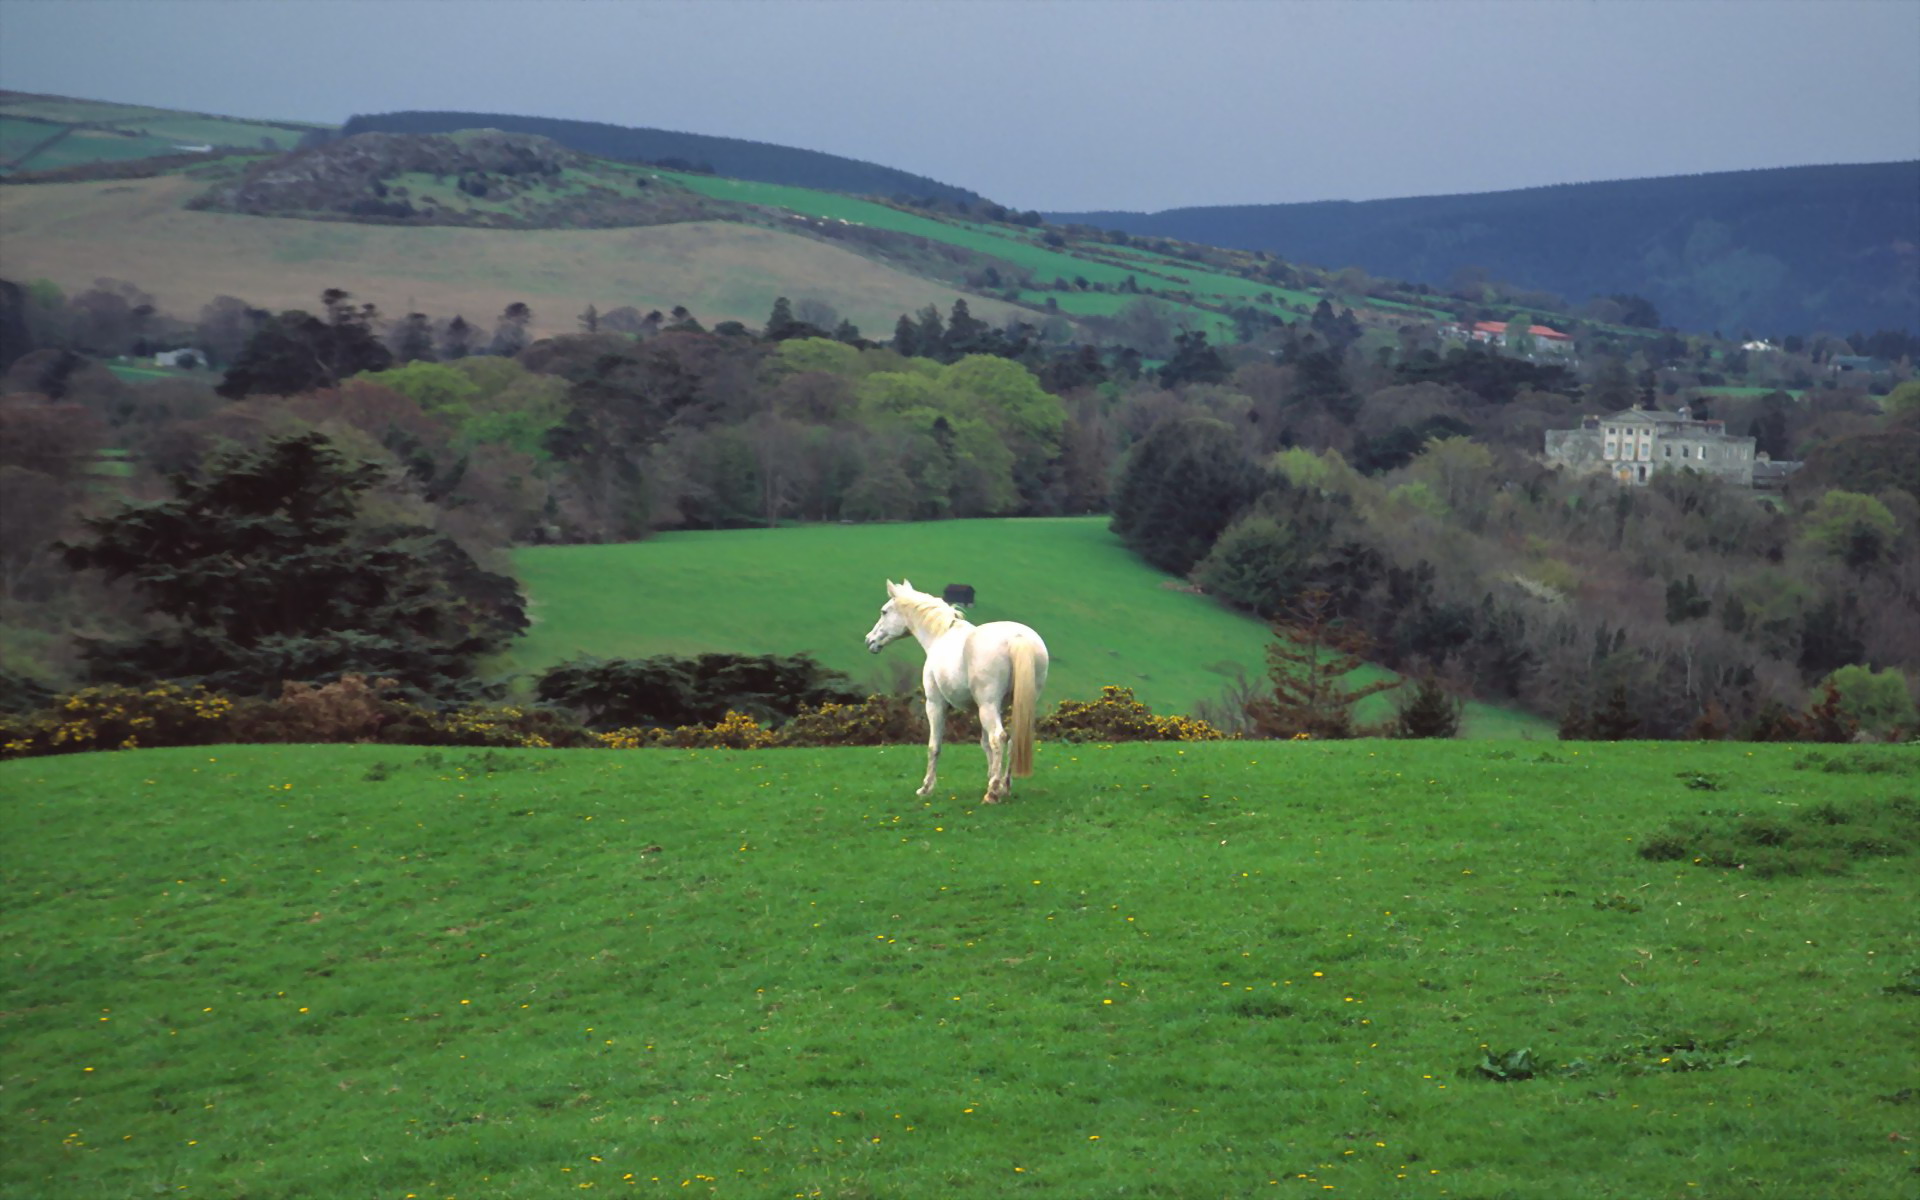  ireland background countryside wicklow backgrounds views images